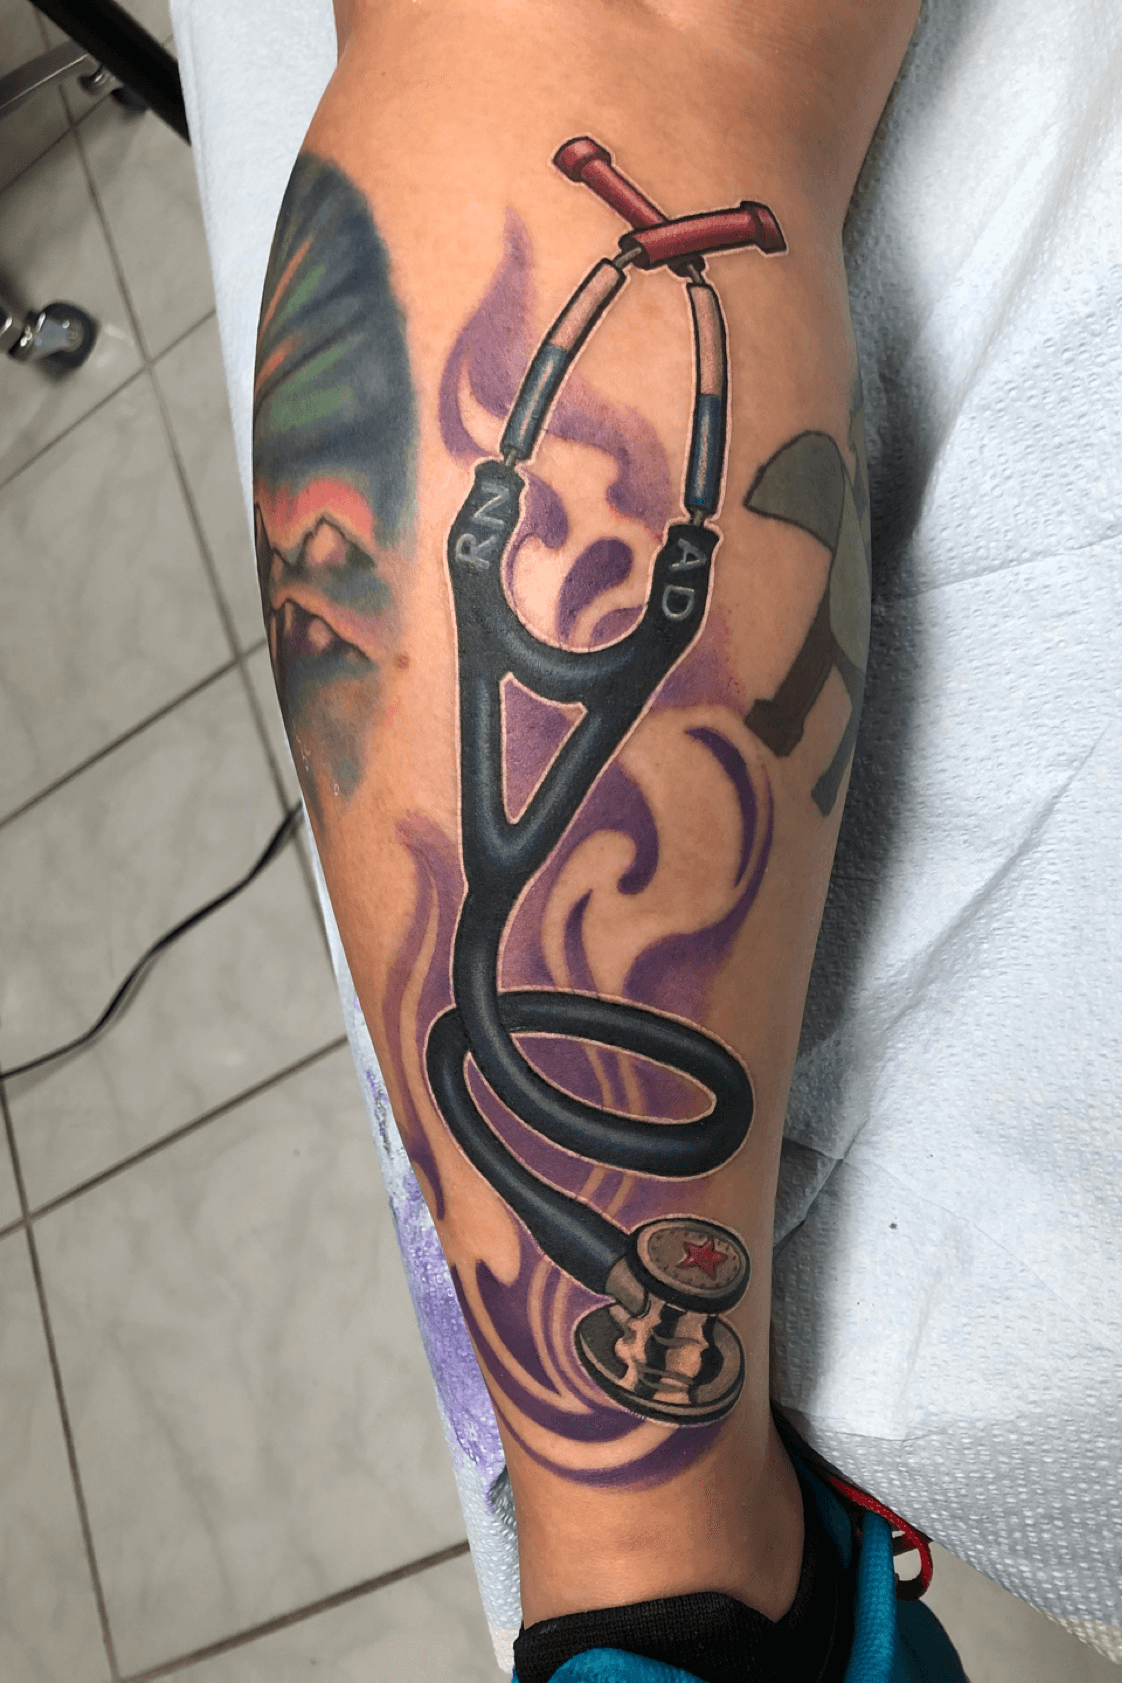 Hand poked stethoscope tattoo located on the bicep